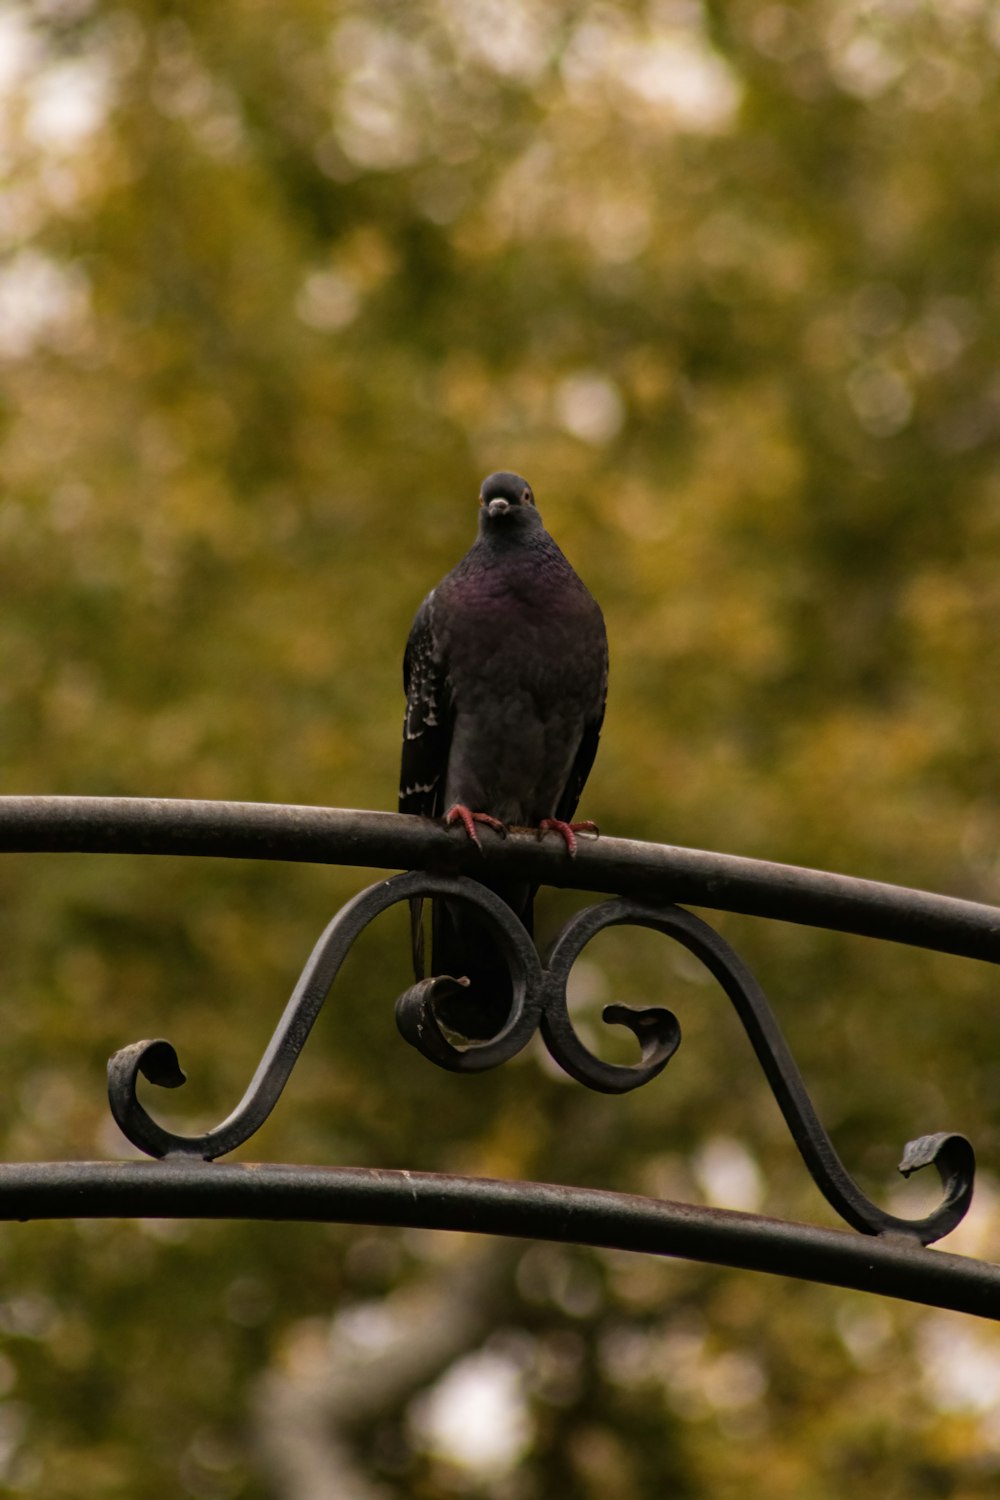 a black bird sitting on top of a metal pole